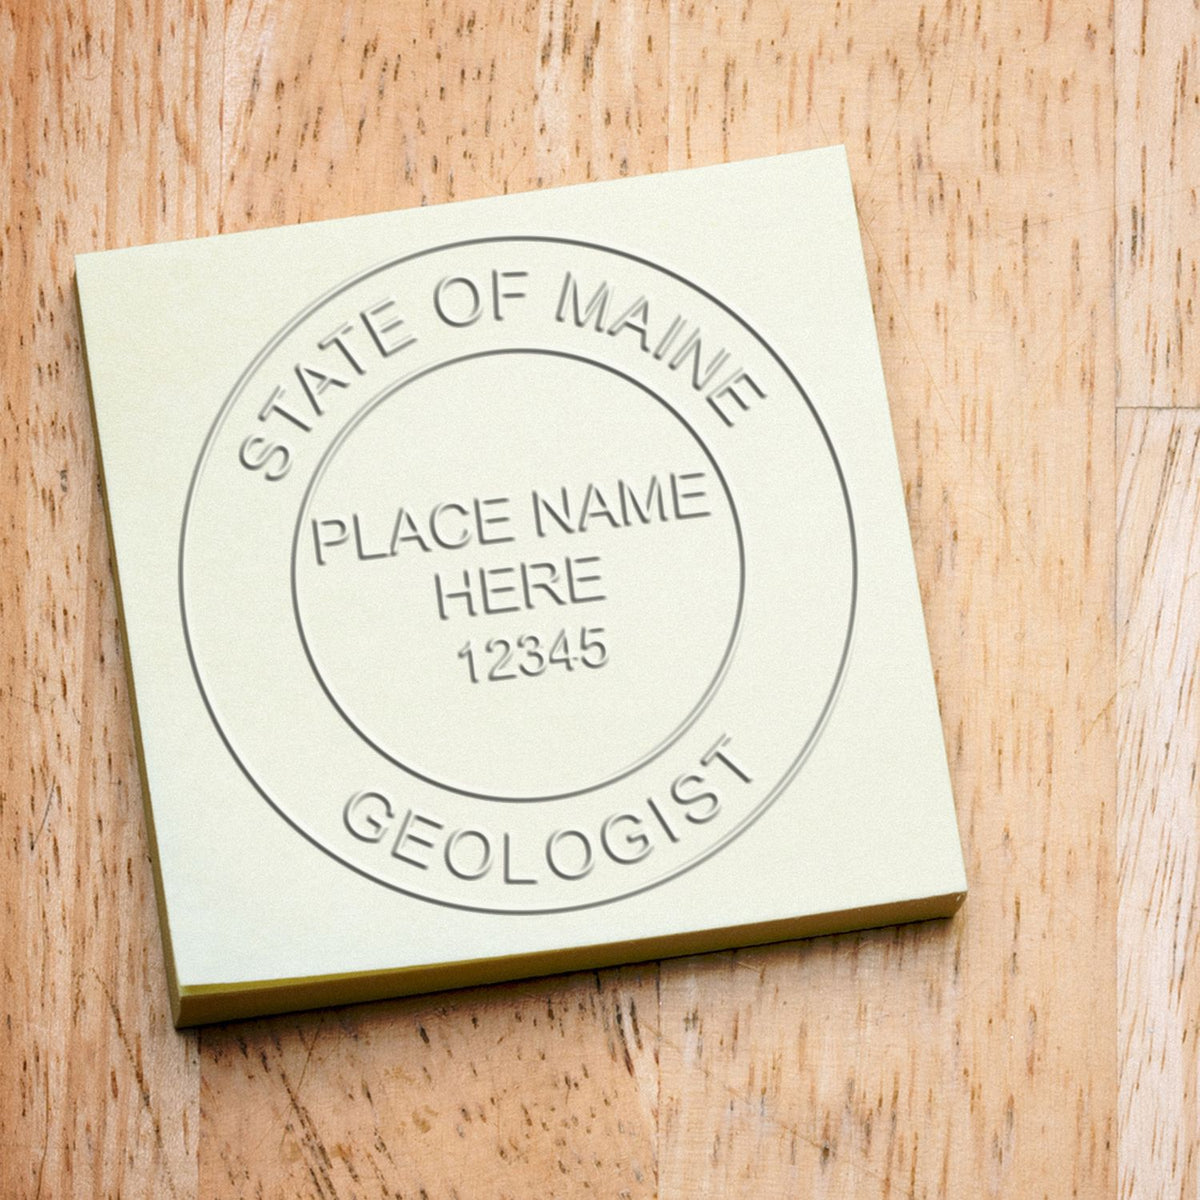 An in use photo of the Gift Maine Geologist Seal showing a sample imprint on a cardstock